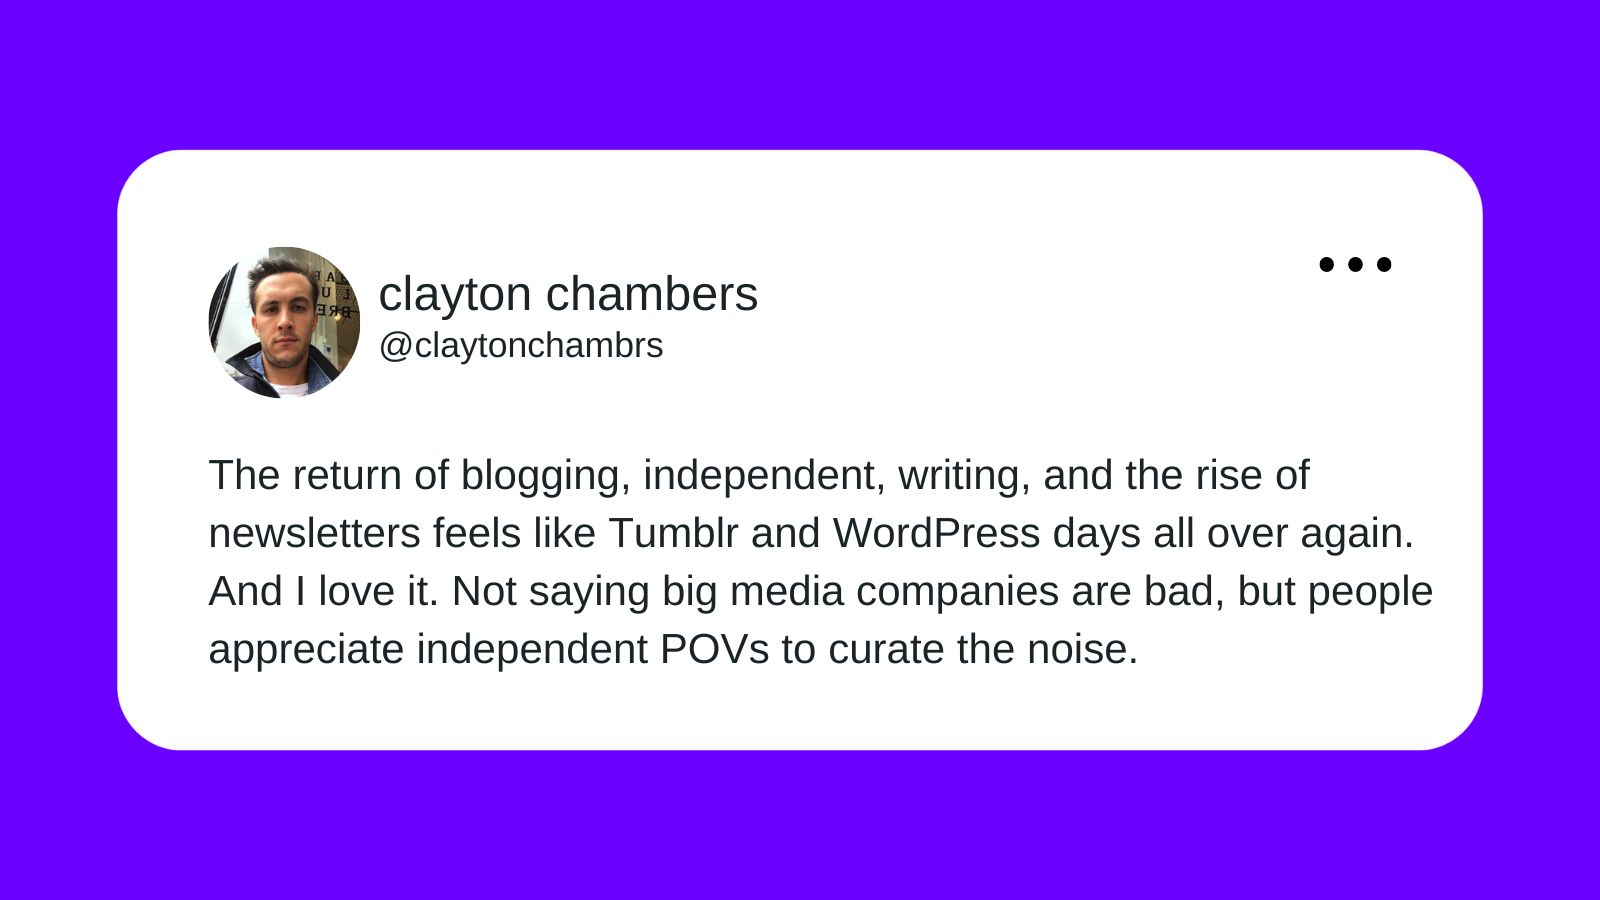 Clayton Chambers tweeting "The return of blogging, independent, writing, and. the rise of newsletters feels like Tumblr and WordPress days all over again. And I love it. Not saying big media companies are bad, but people appreciate independent POVs to curate the noise. 